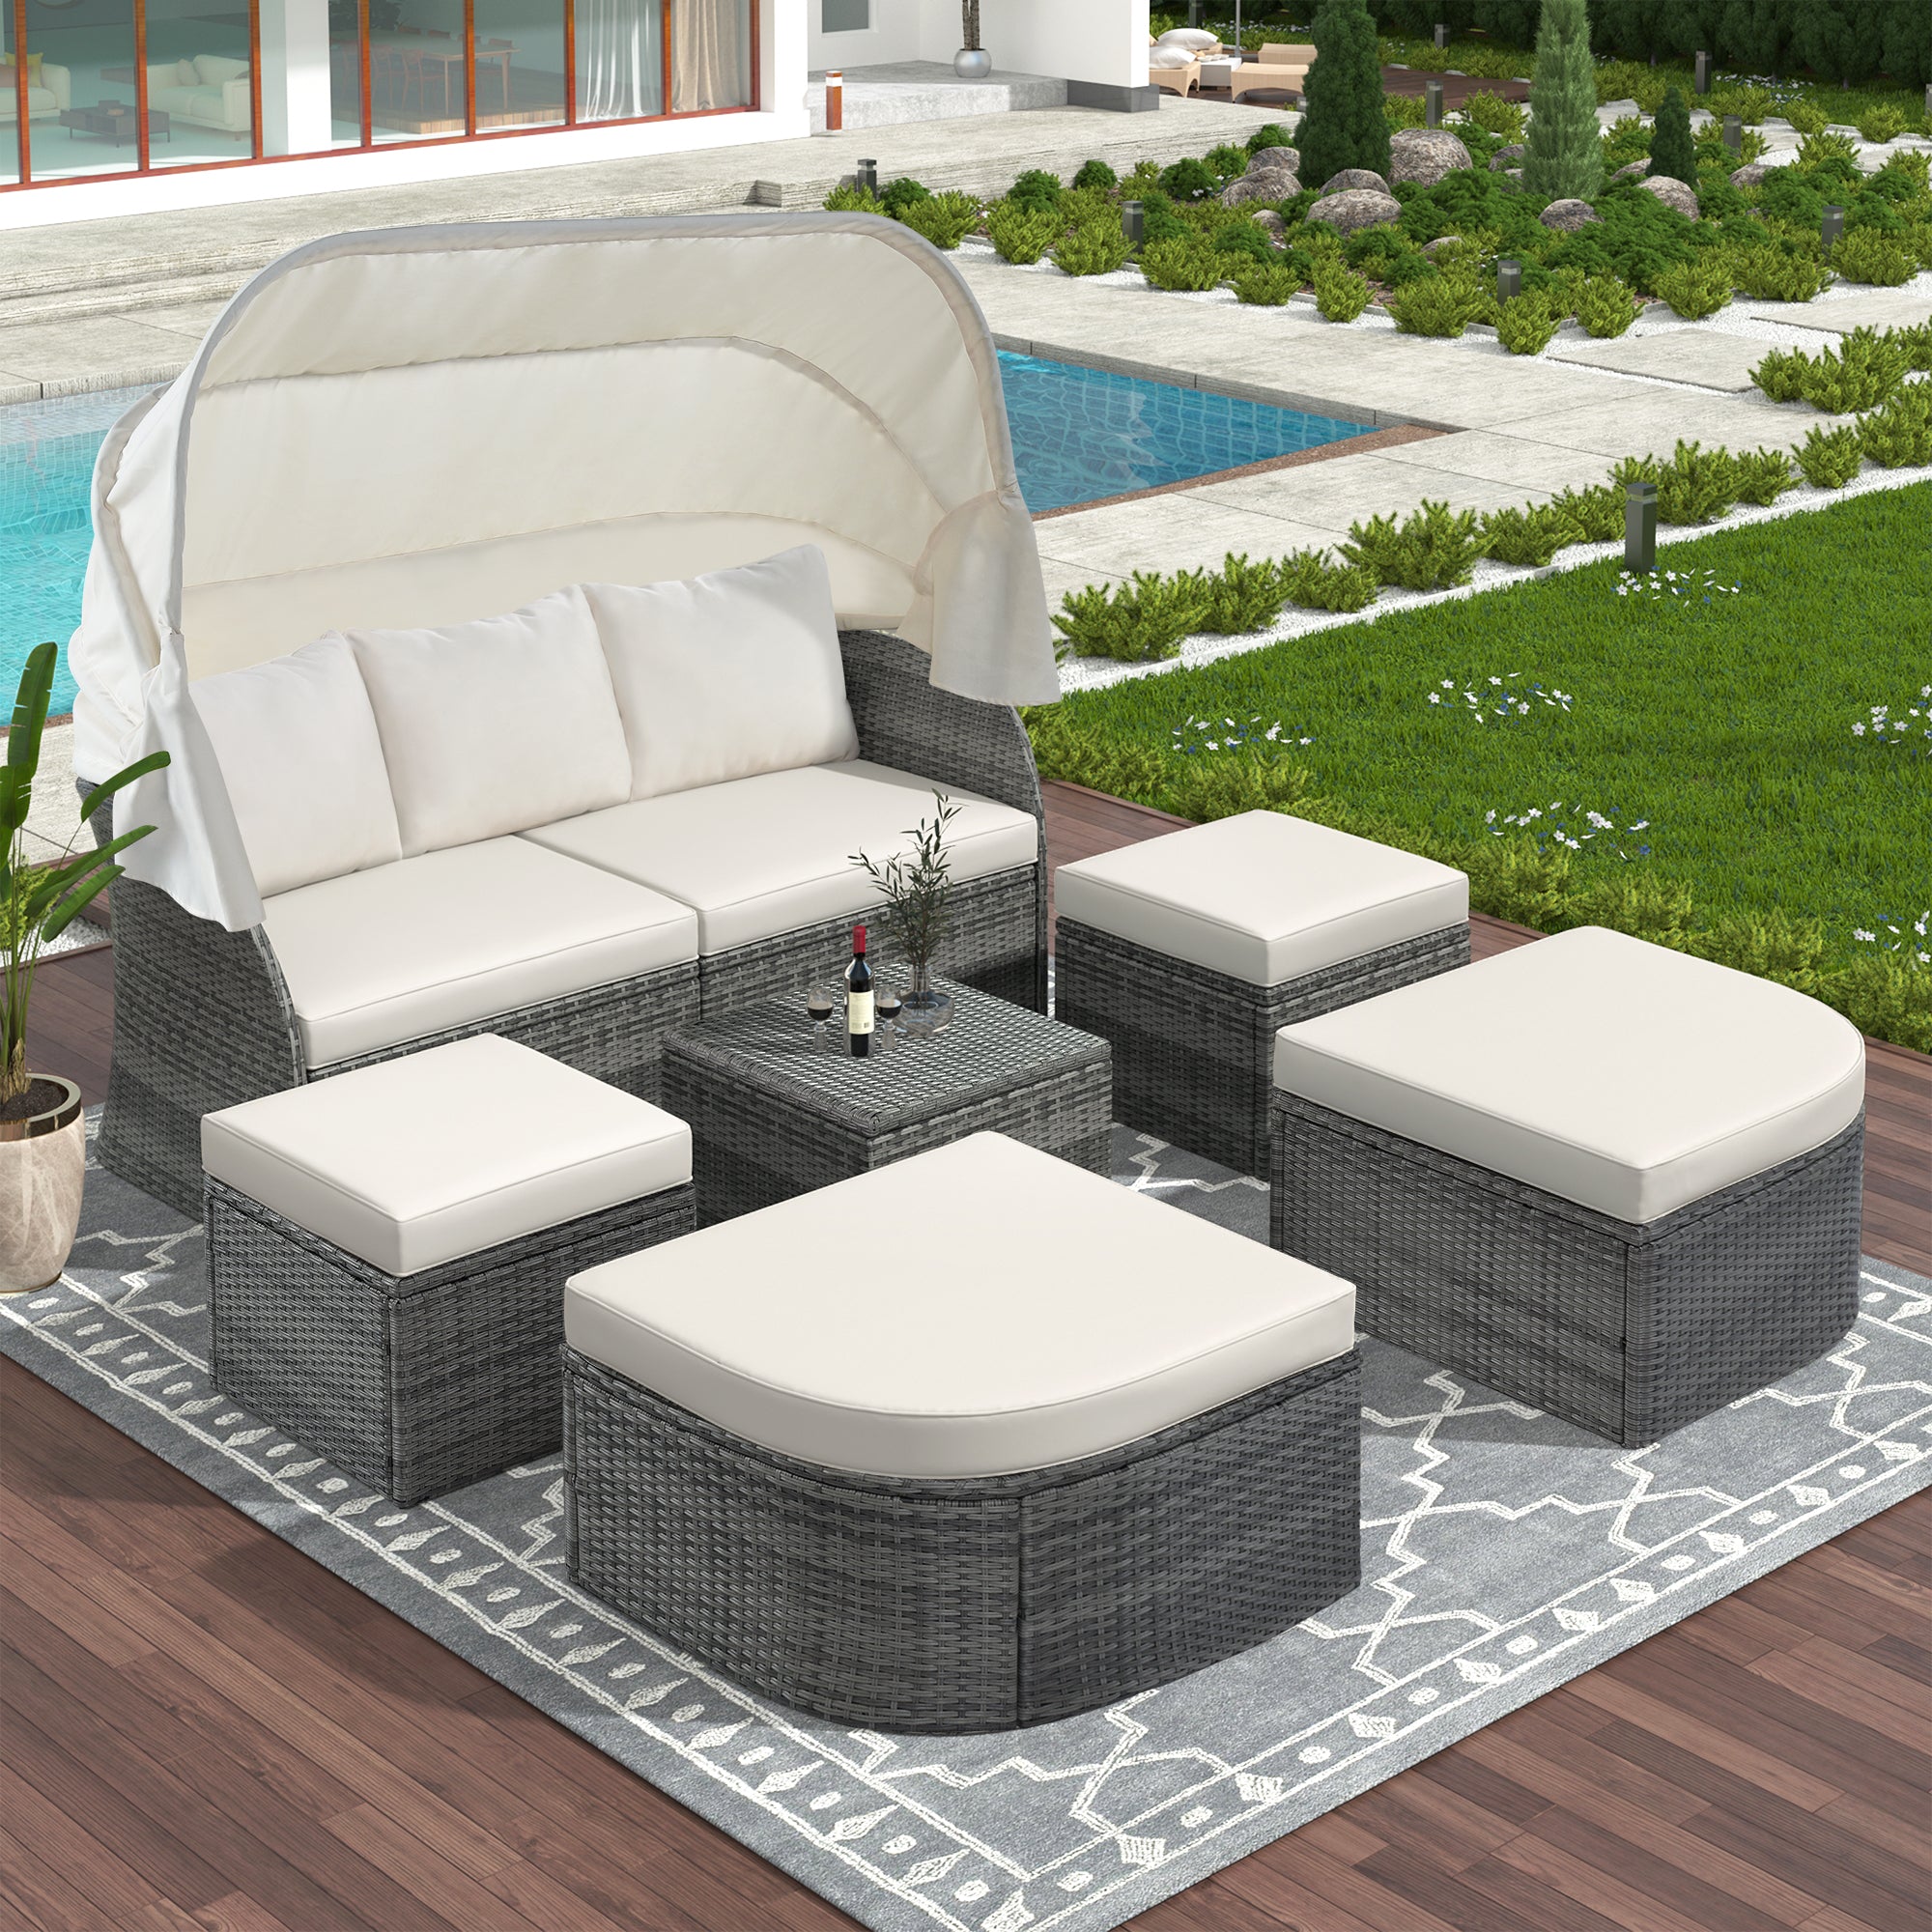 U STYLE Outdoor Patio Furniture Set Daybed Sunbed with beige-rattan